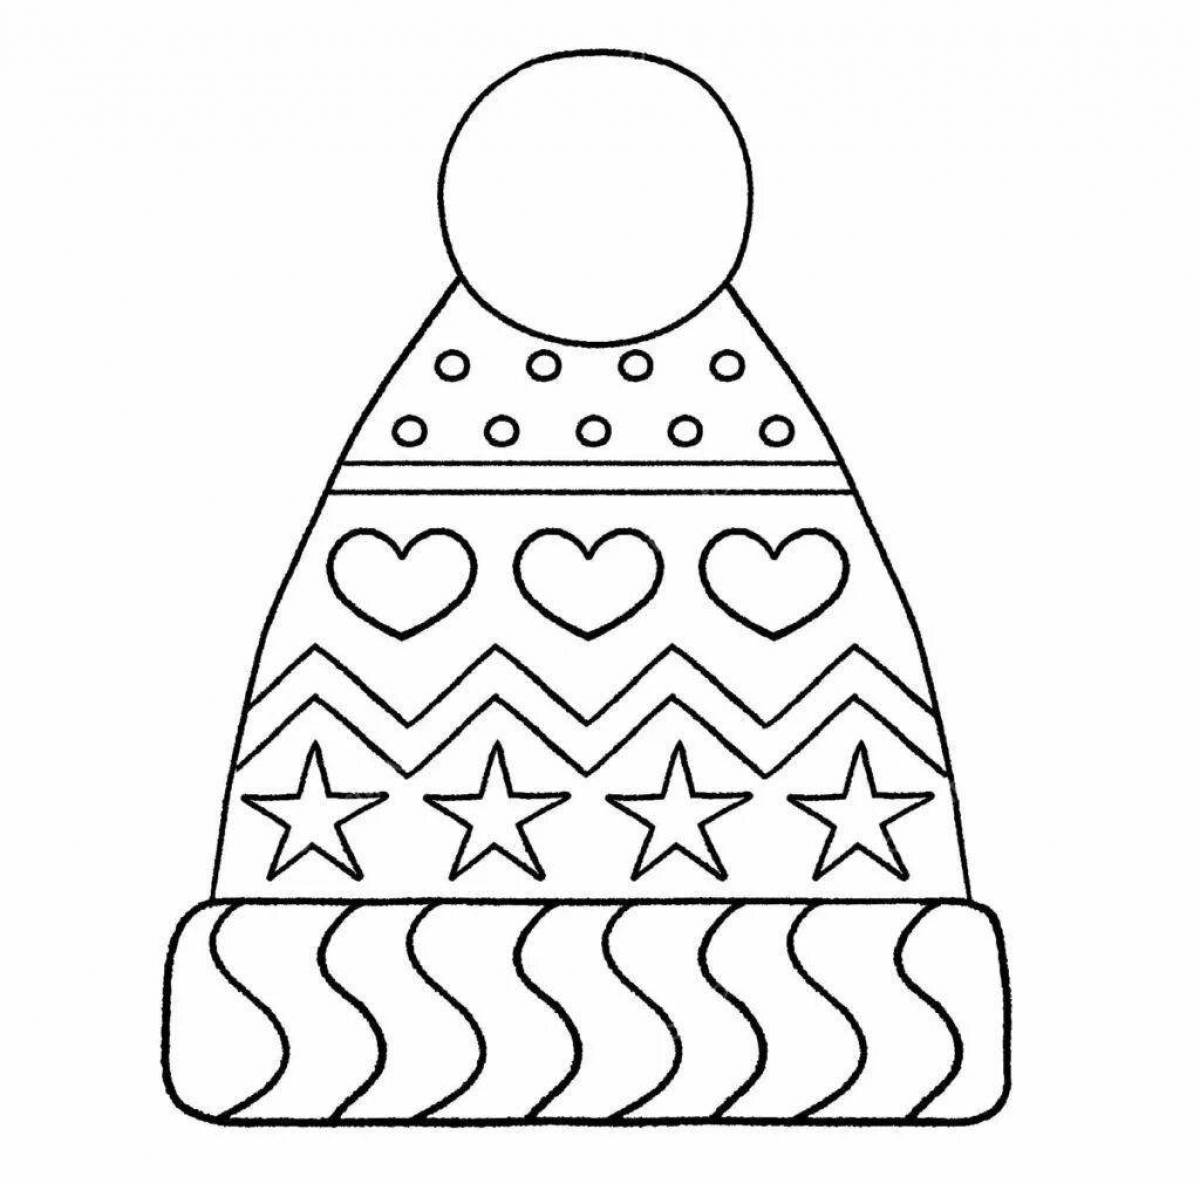 Wonderful mittens and hat coloring book for preschoolers